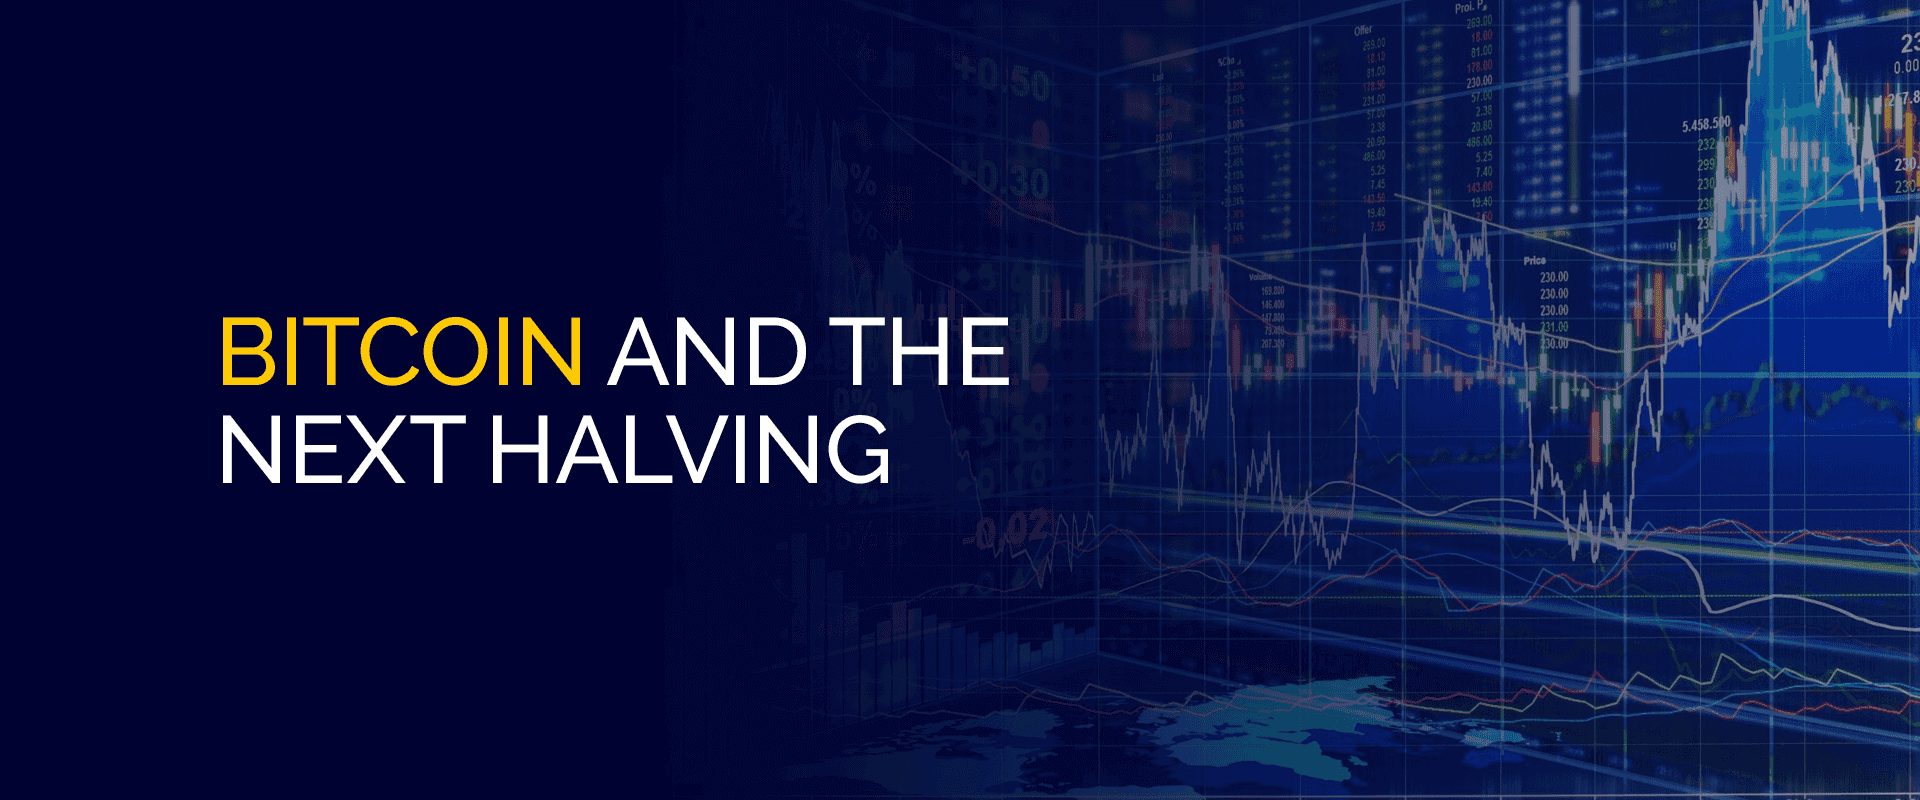 Bitcoin and the Next Halving